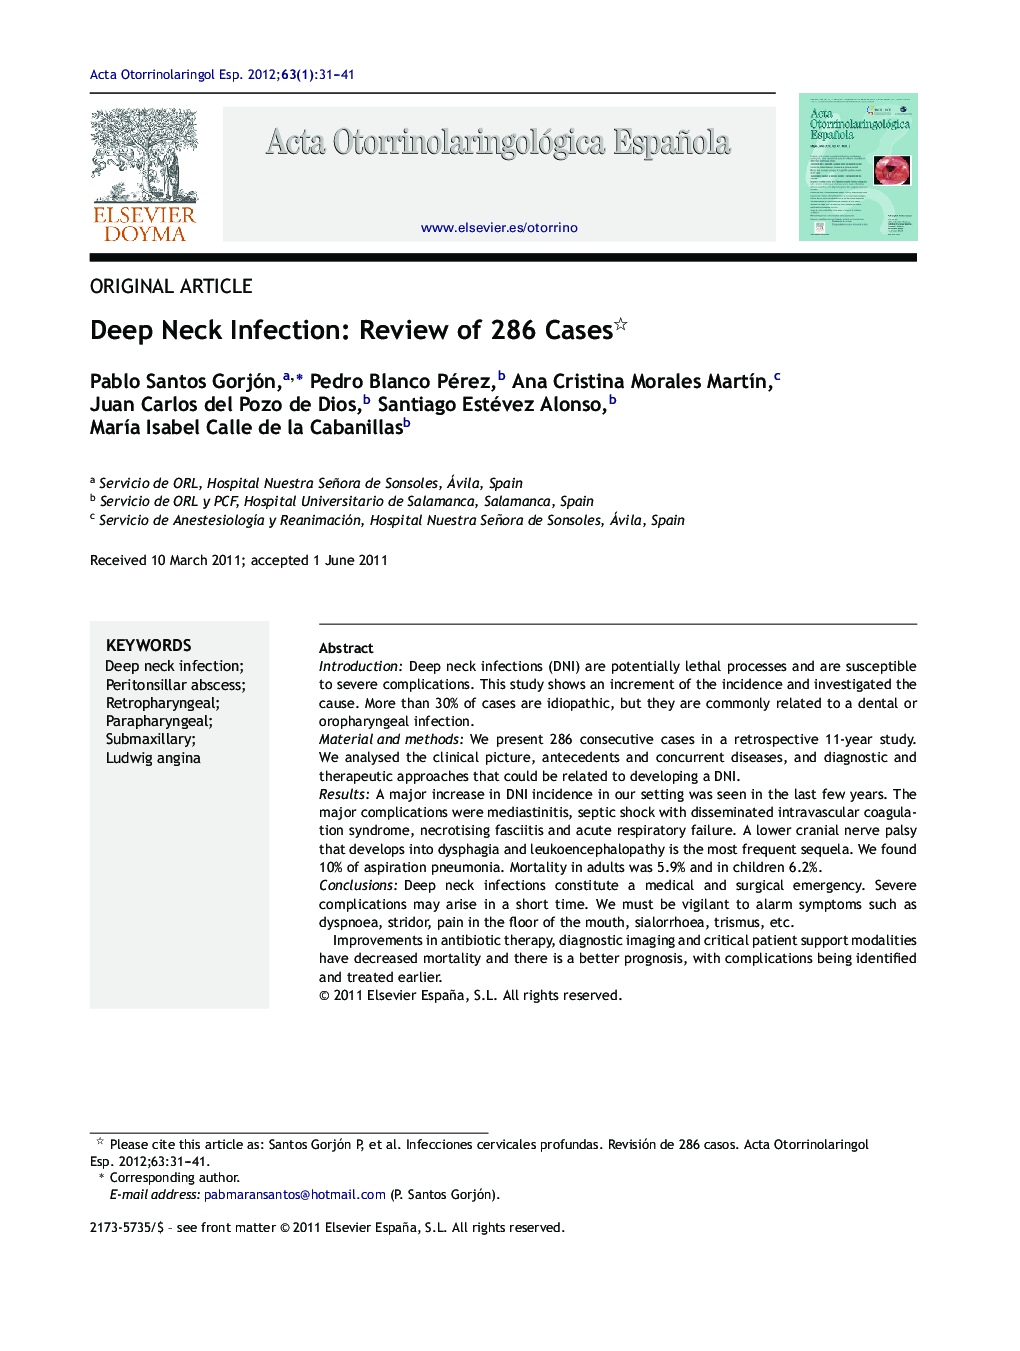 Deep Neck Infection: Review of 286 Cases 